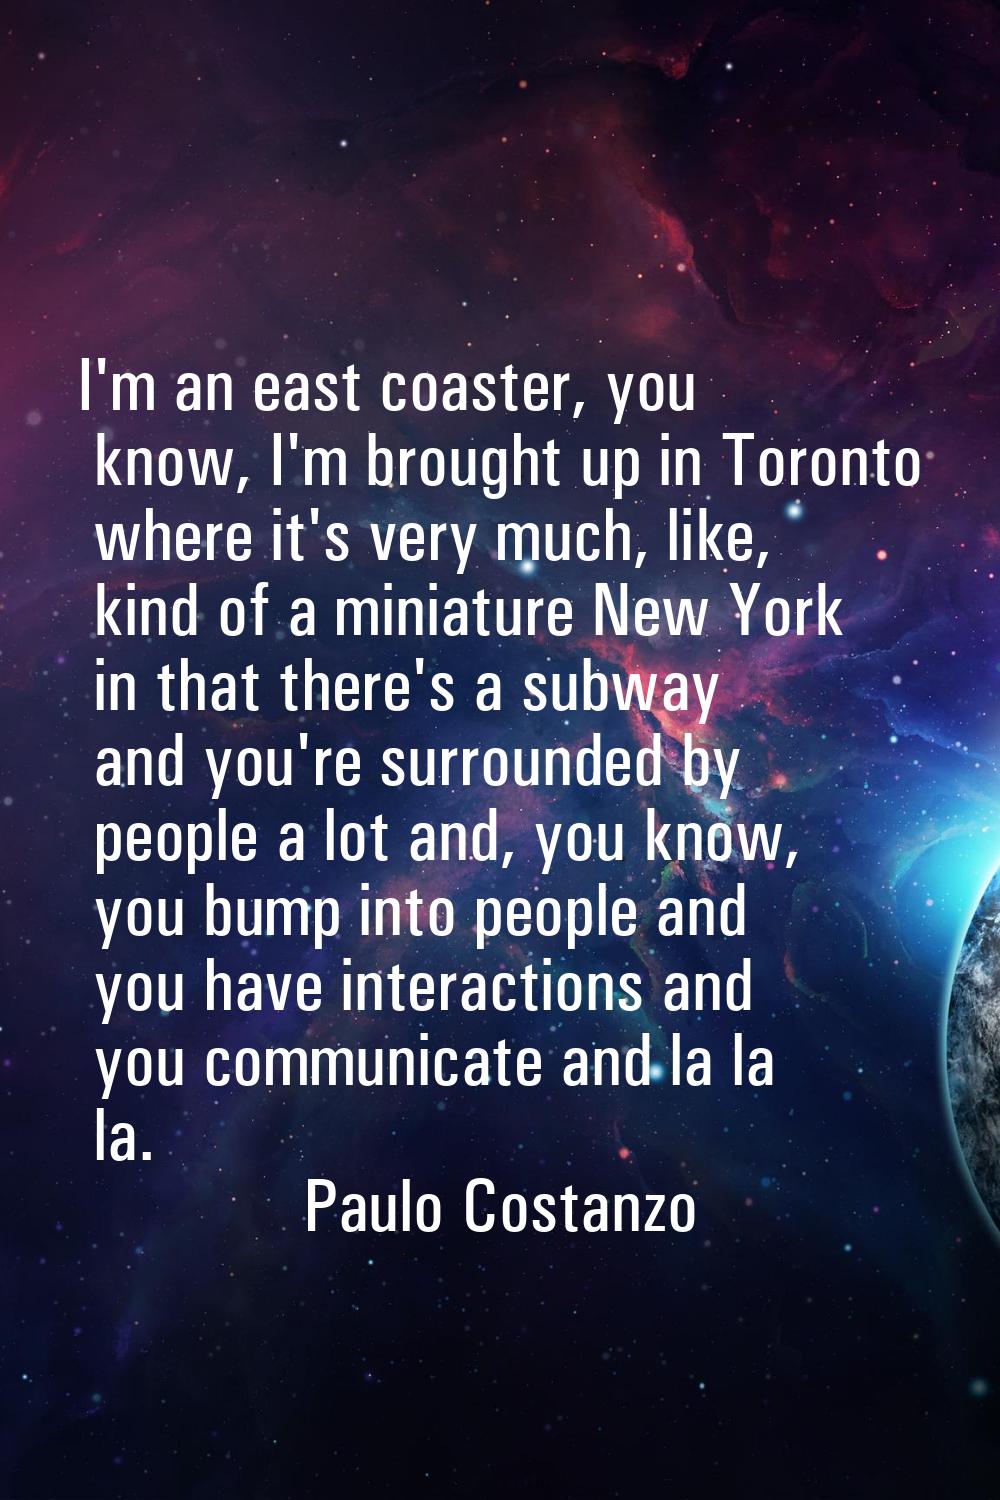 I'm an east coaster, you know, I'm brought up in Toronto where it's very much, like, kind of a mini